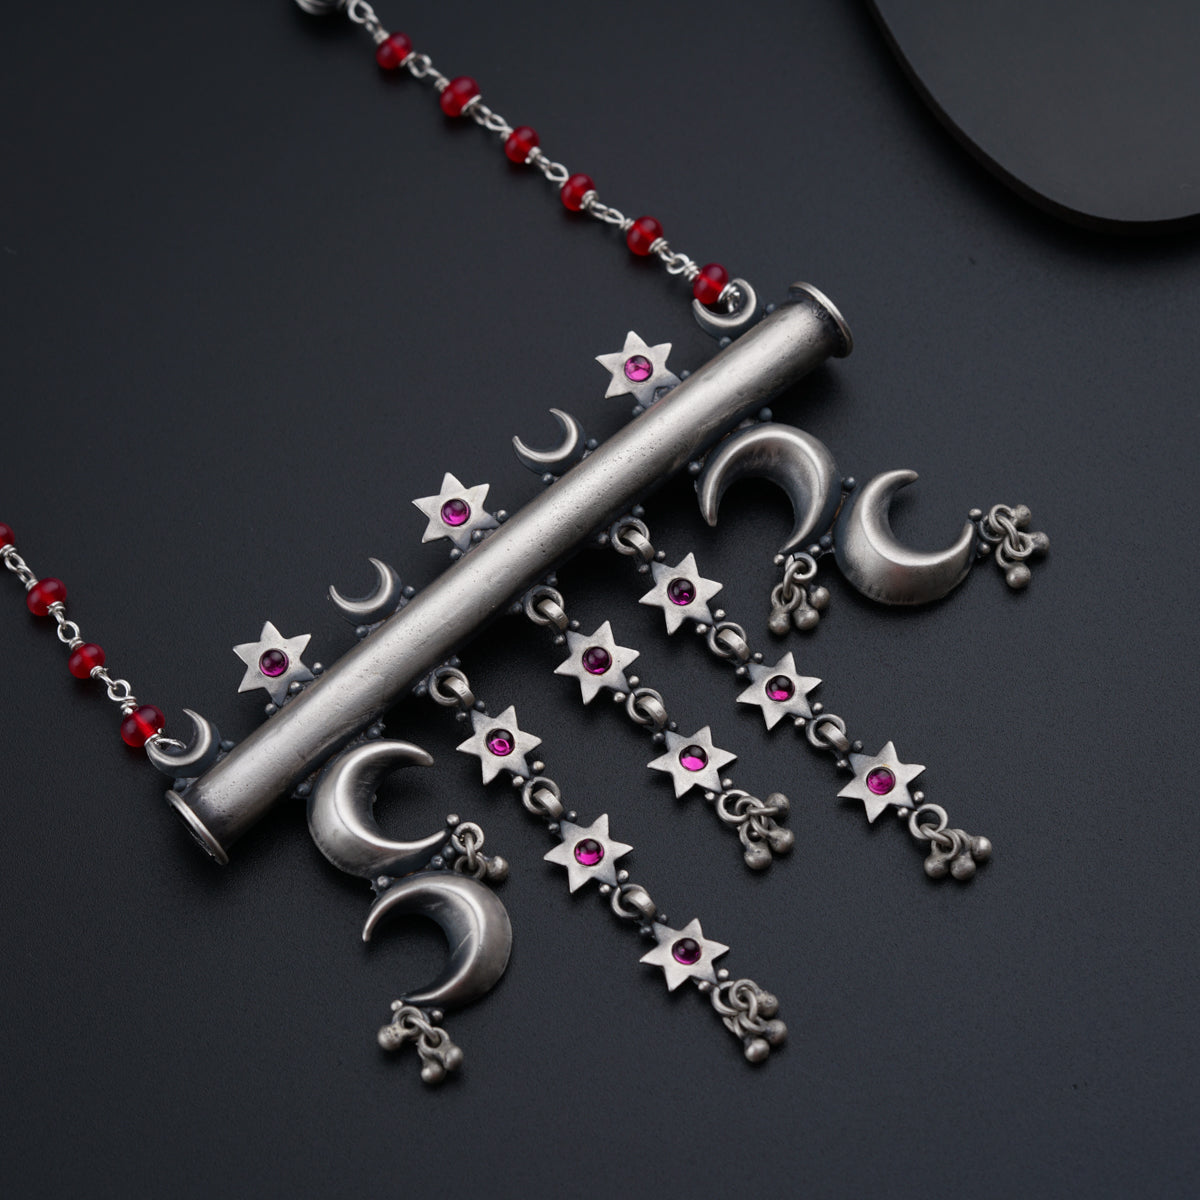 Moonlit Sky Necklace with Rubies